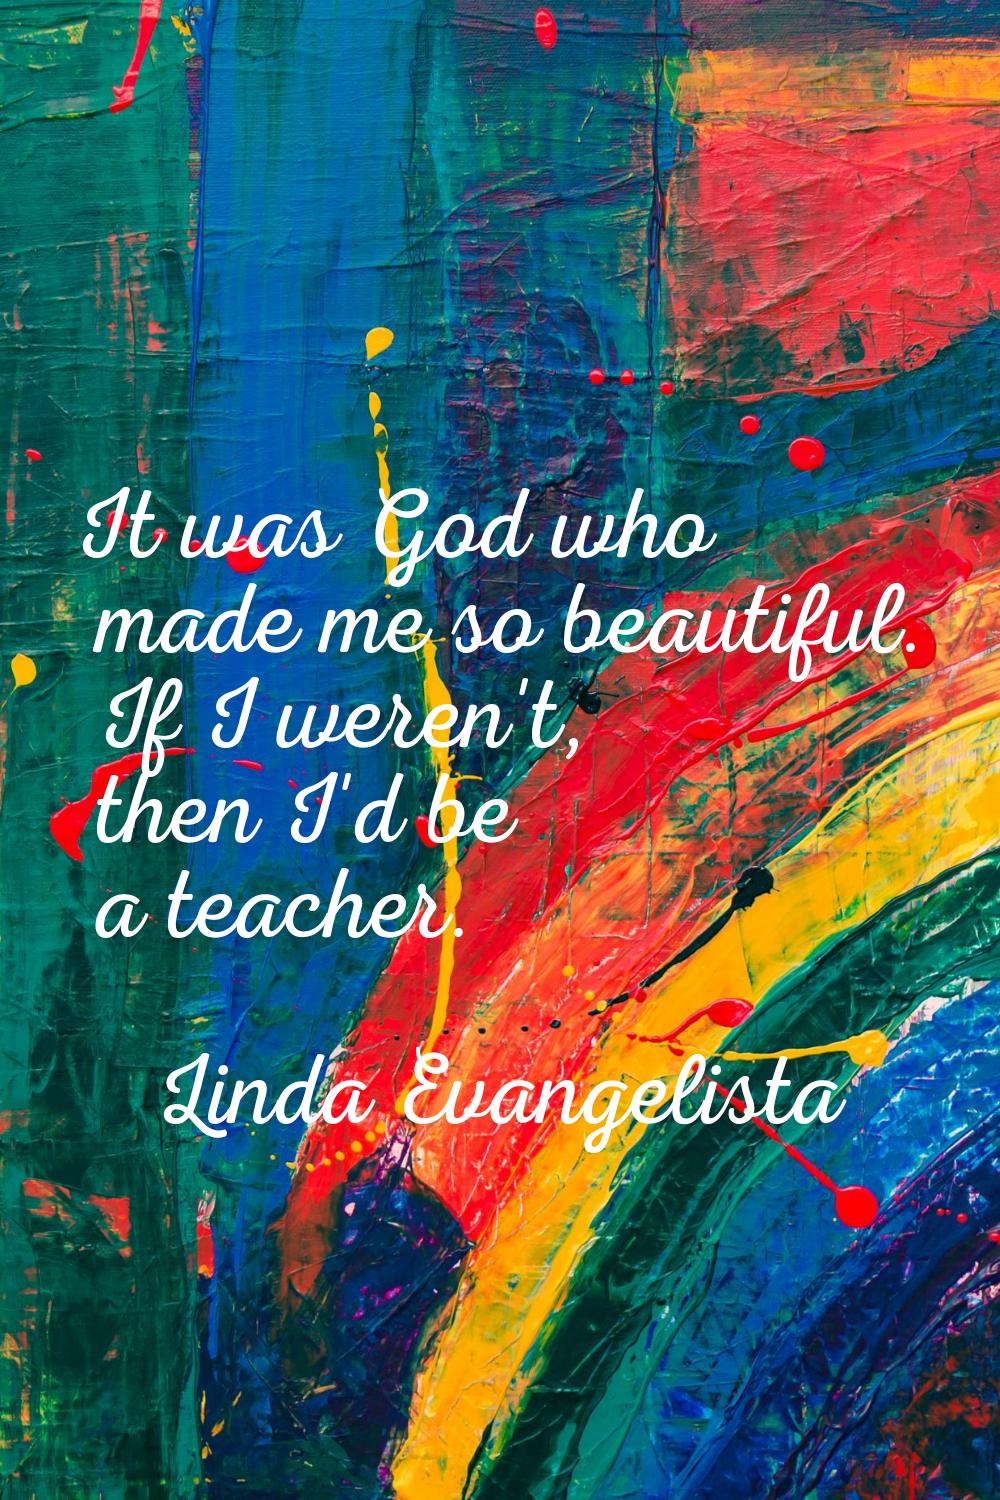 It was God who made me so beautiful. If I weren't, then I'd be a teacher.